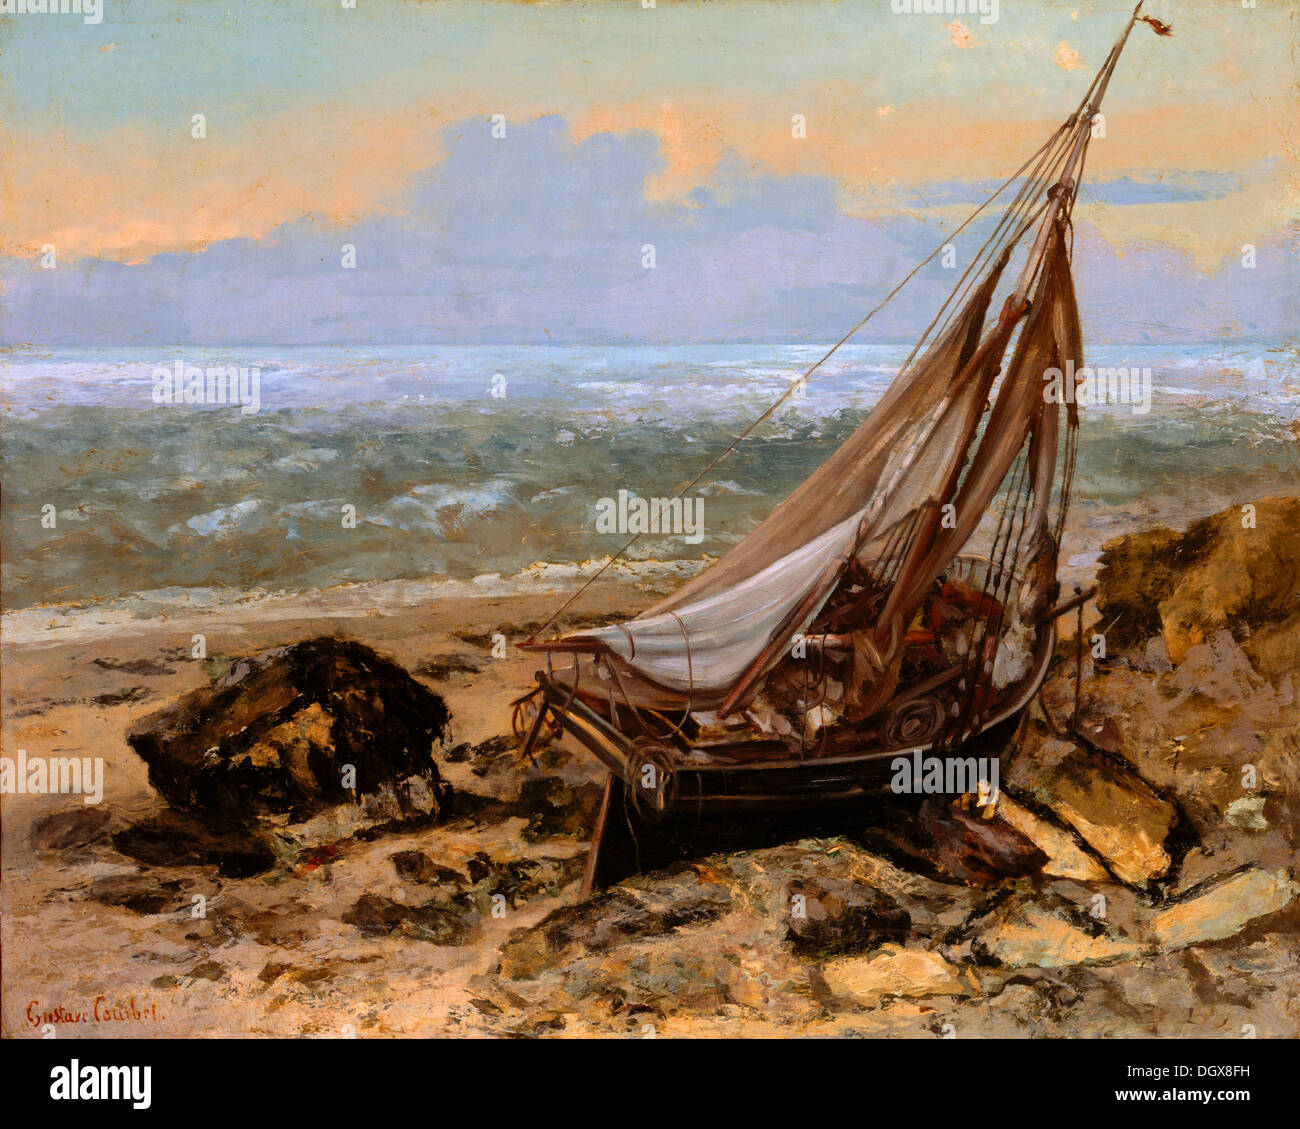 The Fishing Boat - by Gustave Courbet, 1865 Stock Photo